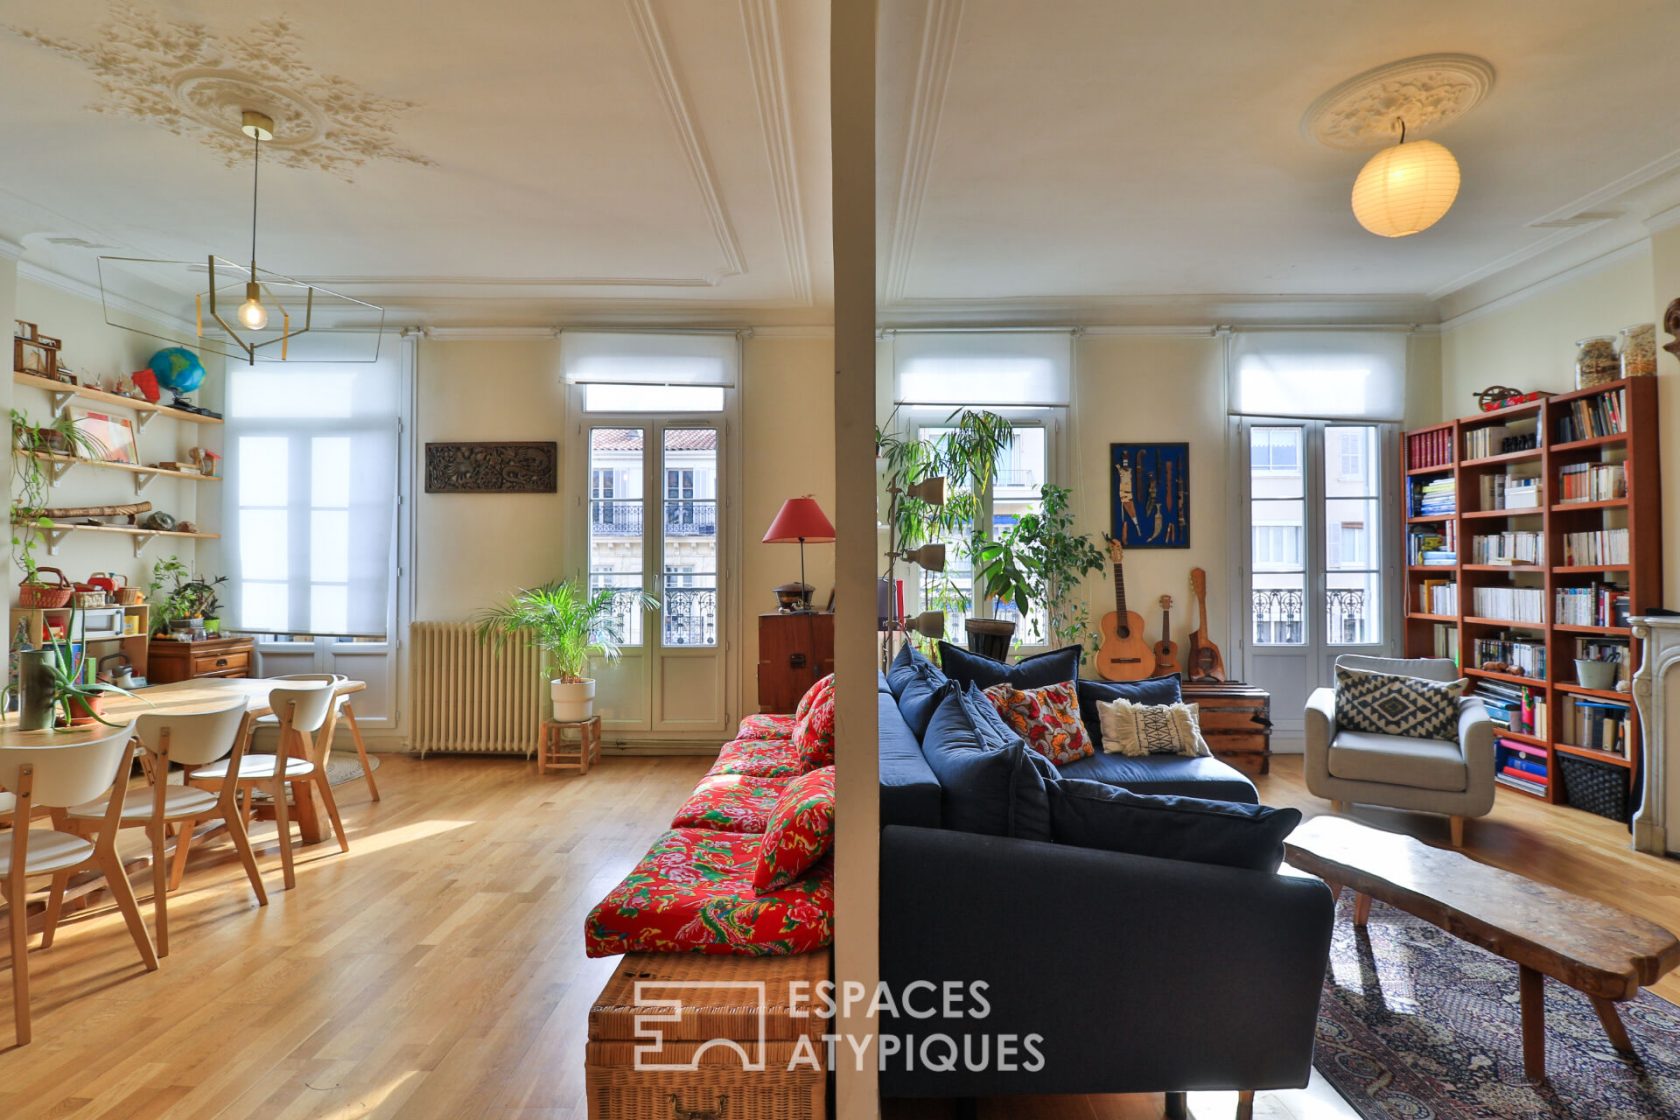 Haussmannian chic and bohemian in the upper city